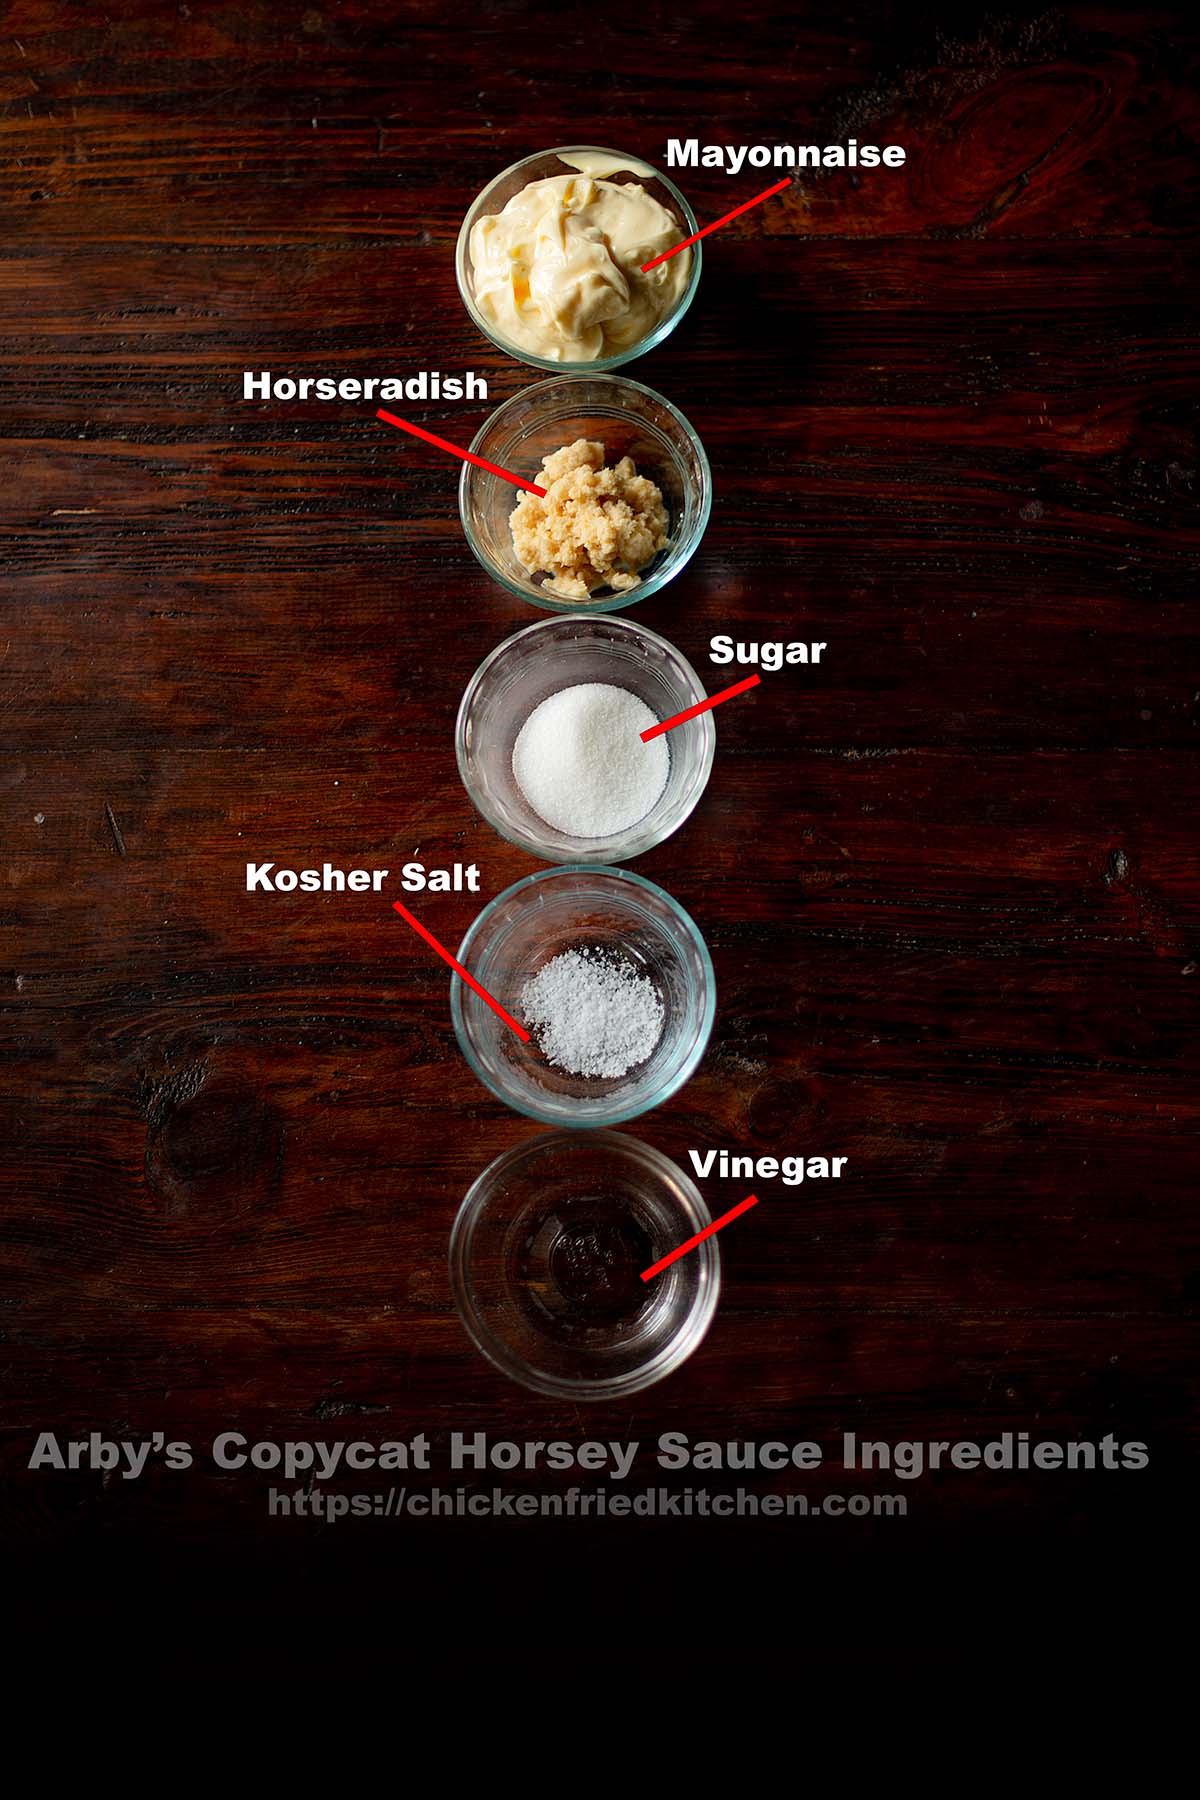 Copycat Horsey Sauce ingredients labeled on a wooden table.